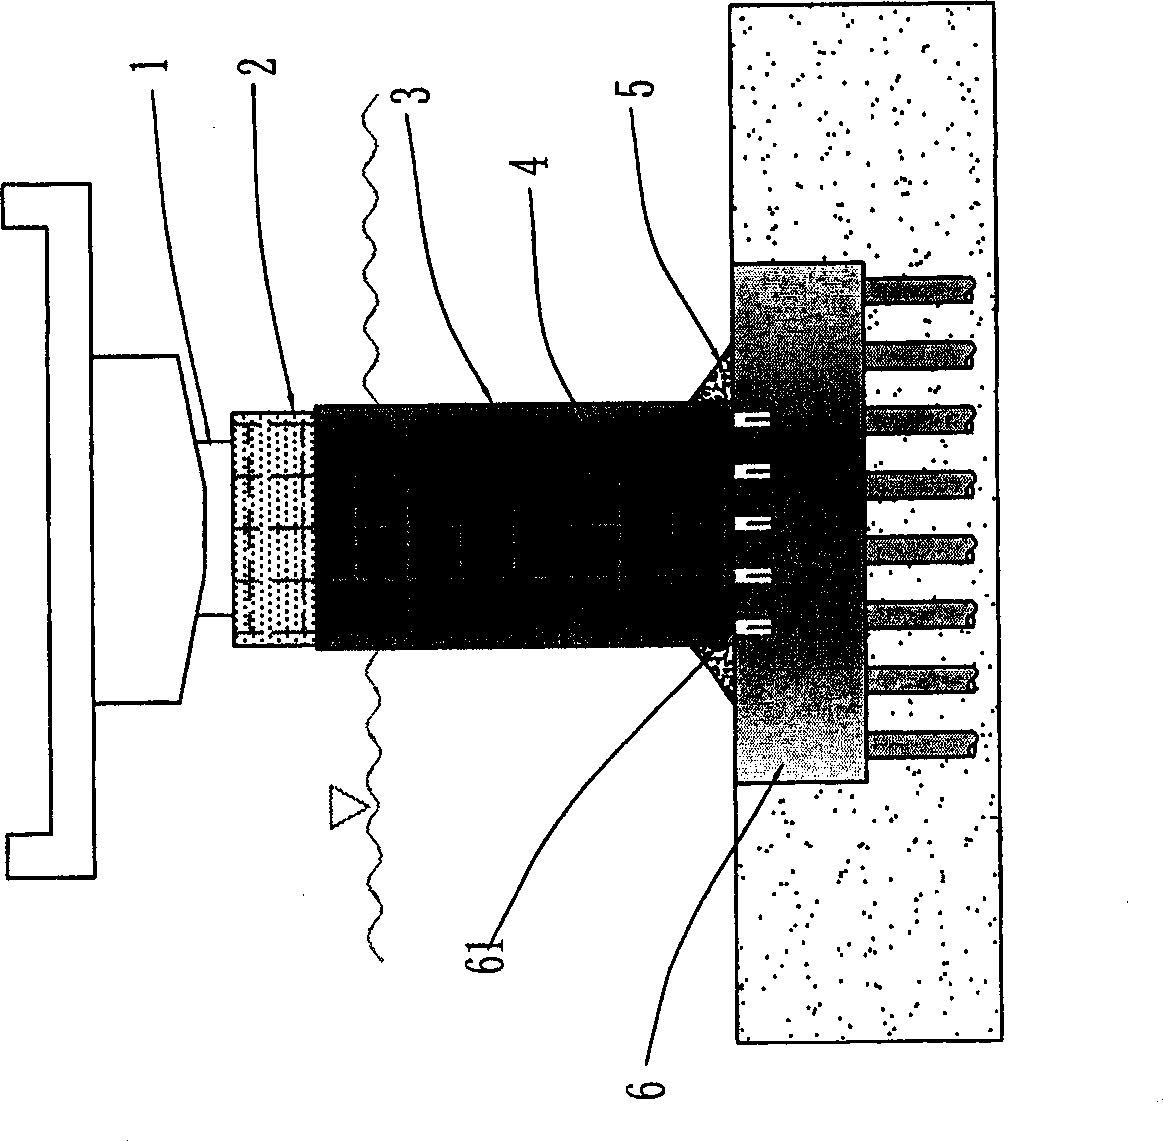 Method for reinforcing underwater structure by fiber-reinforced composite material grid ribs